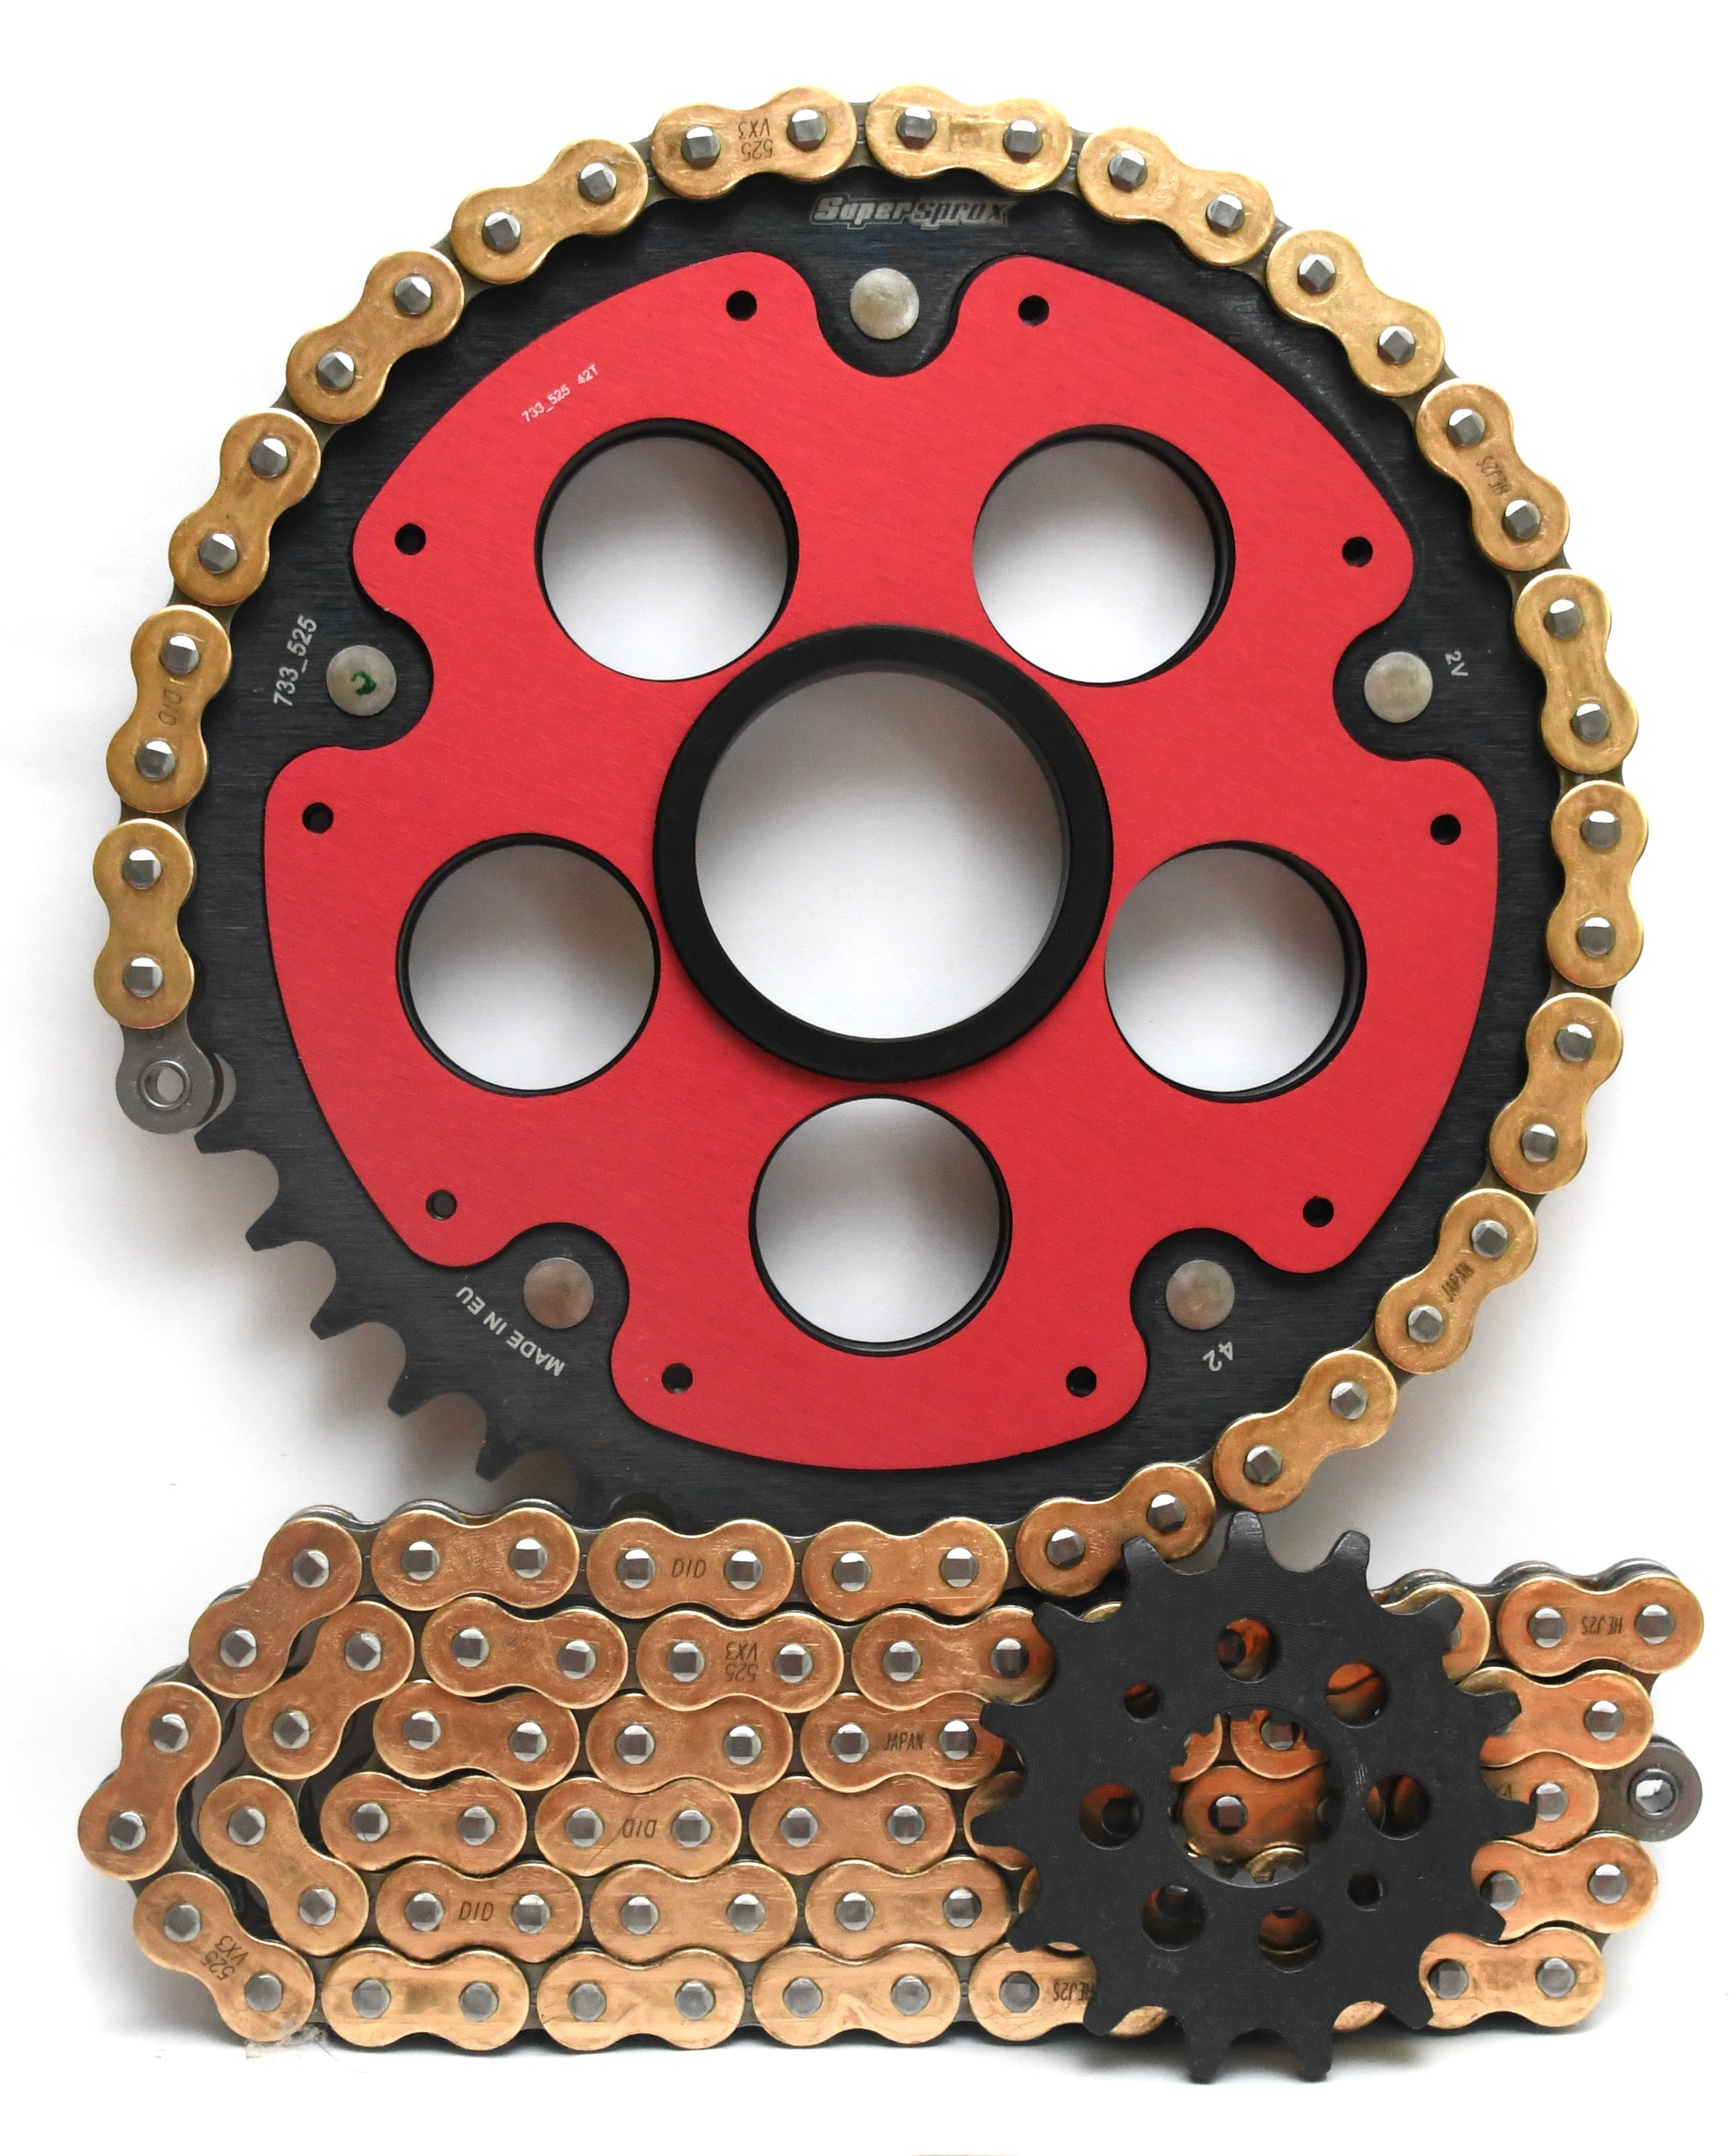 Supersprox Chain & Sprocket Kit for Ducati Streetfighter 848 2011-2015 - Standard Gearing